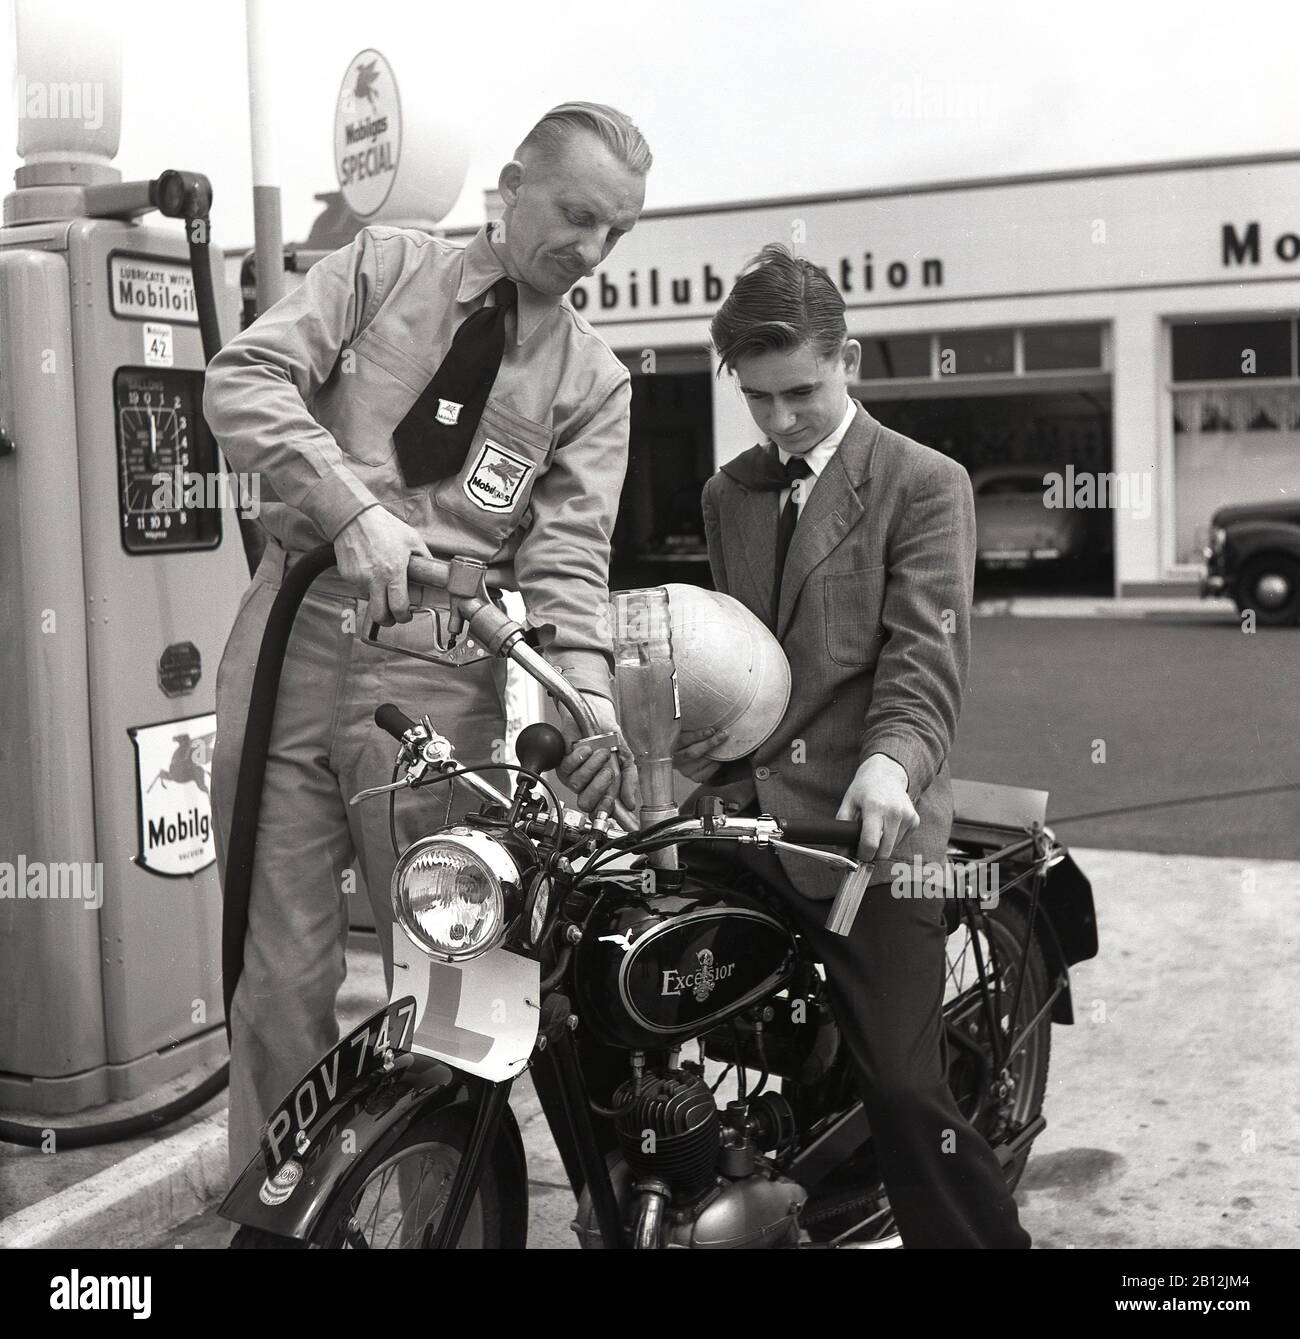 1950s, historical, a young male motorcyclist parked by the fuel pumps at a garage getting fuel and oil for his Excelsior motorcycle by a uniformed  forecourt attendant, London, England, UK. As motoring increased in post-war Britain, larger garages or 'service stations' were opened offering a range of motor-related services including manned forecourt attendants. Based in Coventry, England, Excelsior were Britain's first motorcycle manufacturer, producing their own 'motor-bicycle' in 1896. Stock Photo